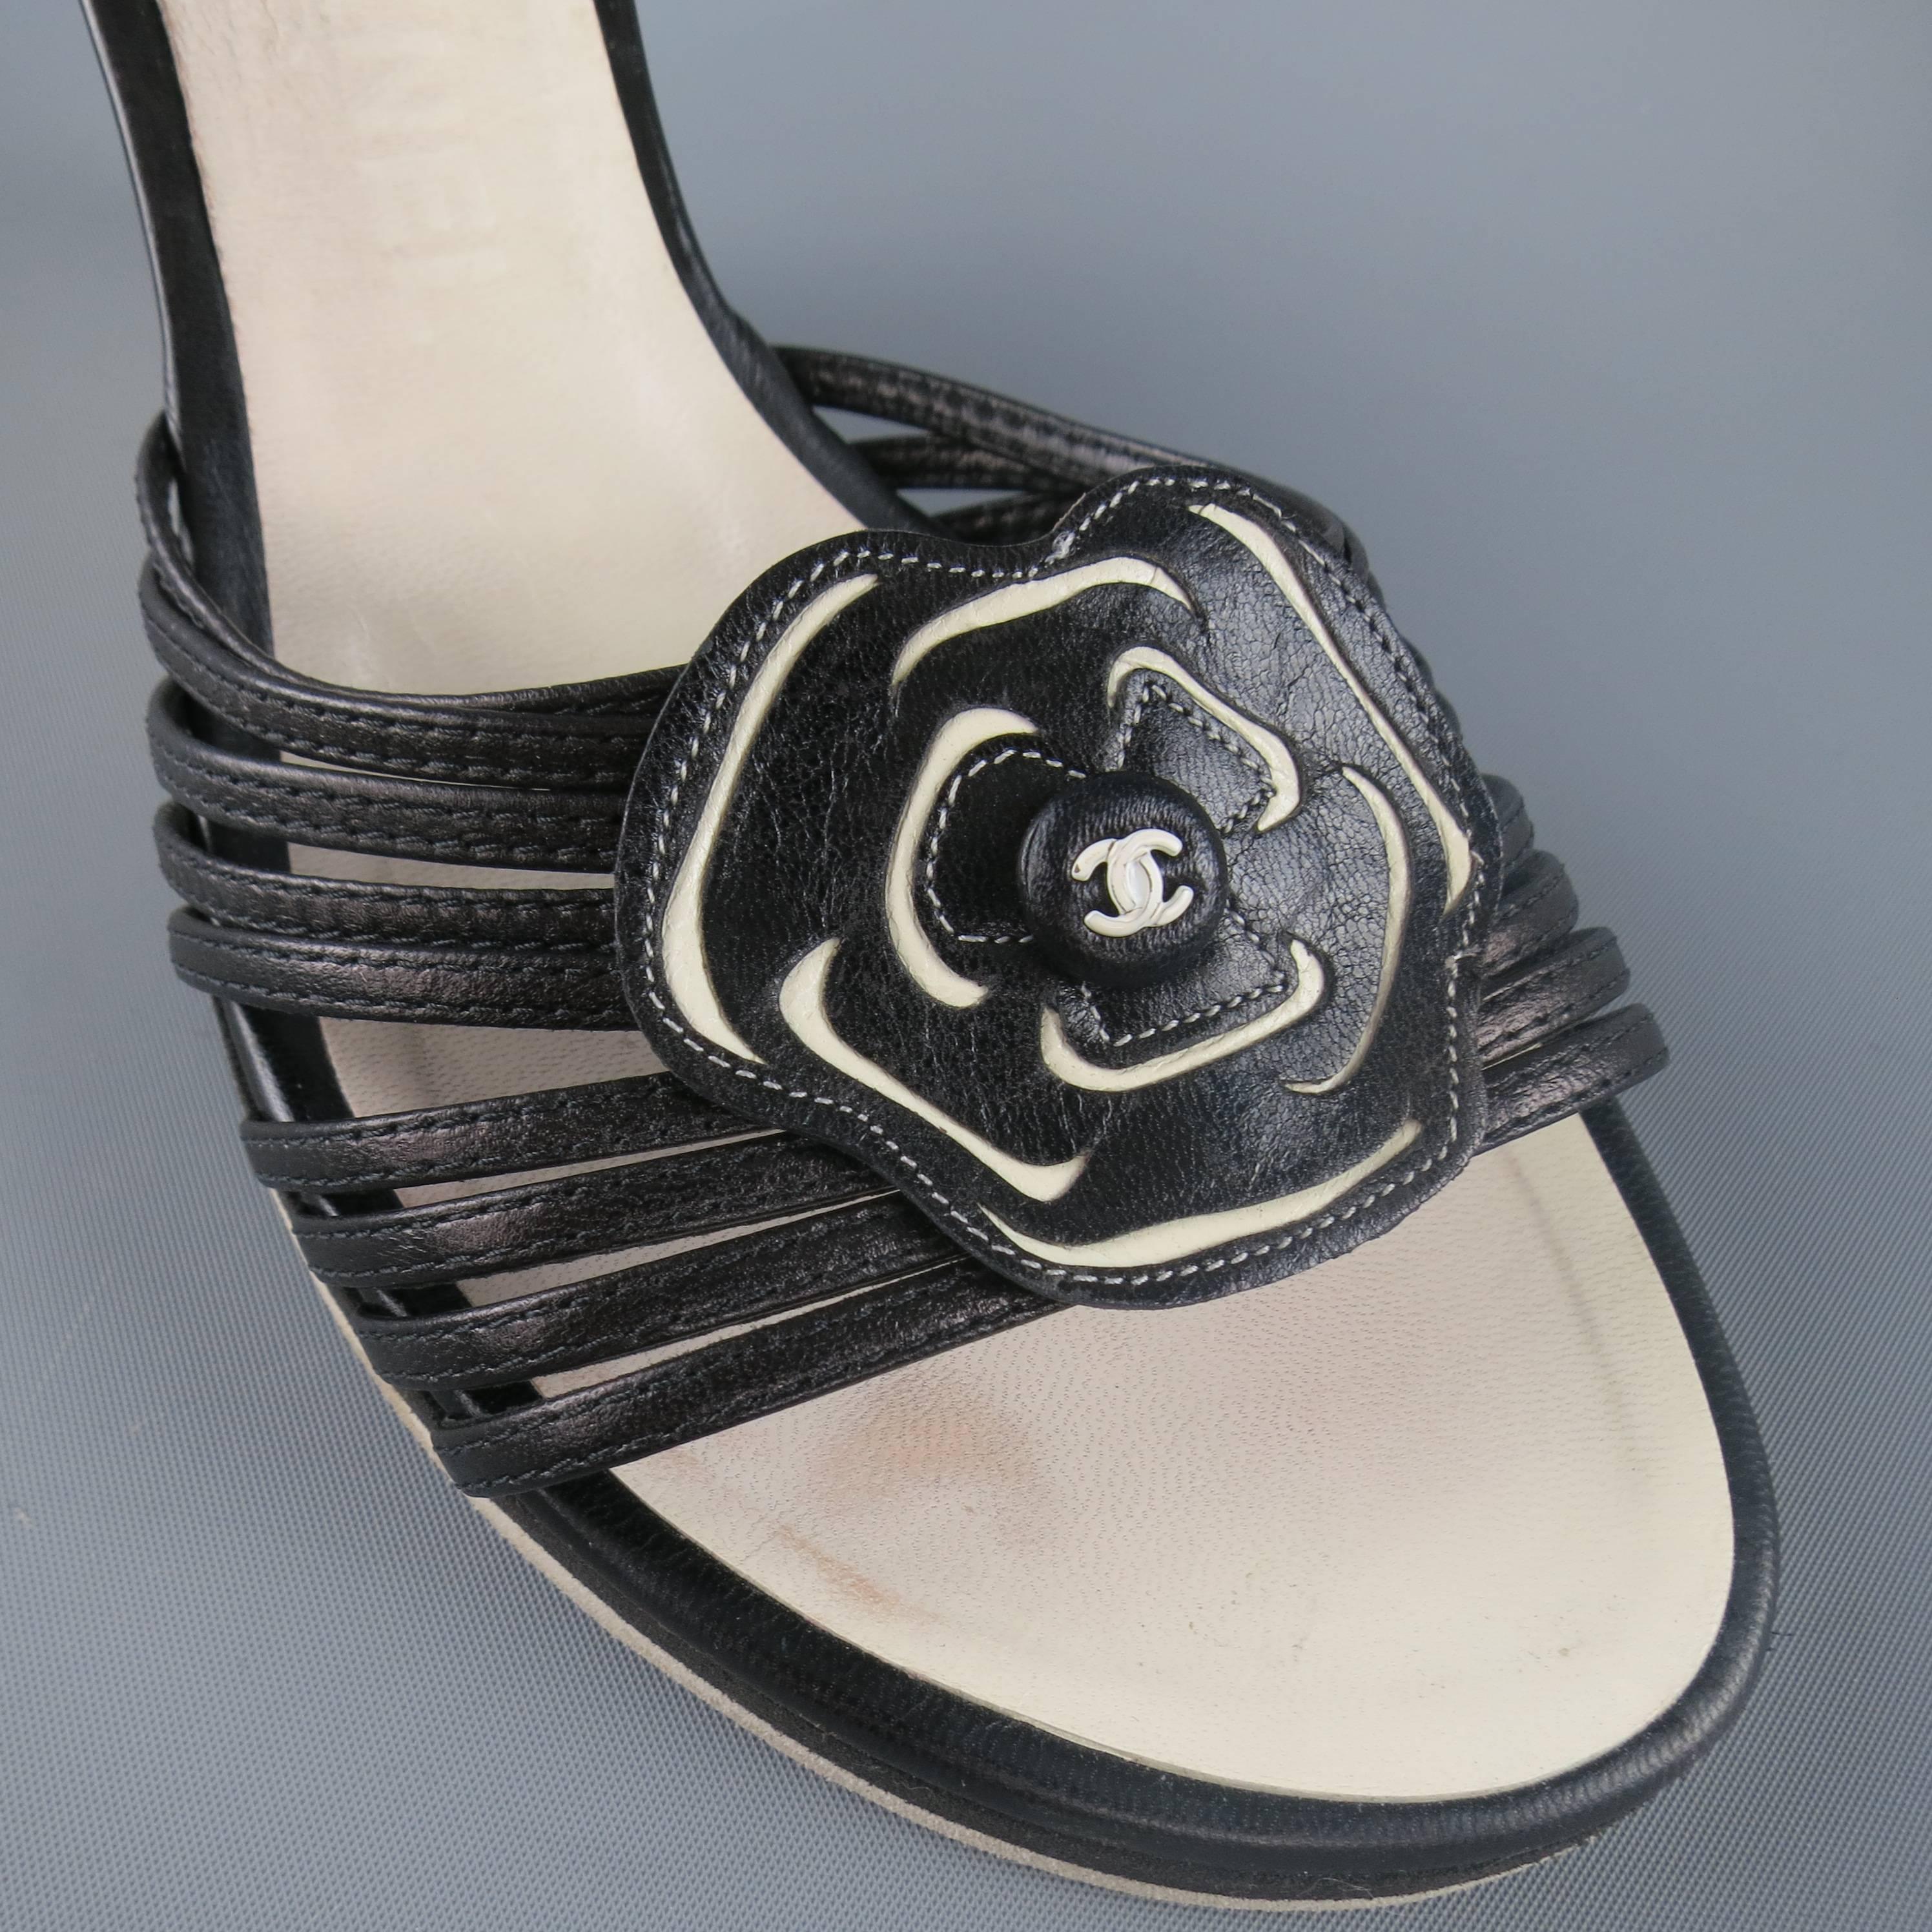 Beige CHANEL Size 8 Black & White Leather Camellia Wedge Sandals